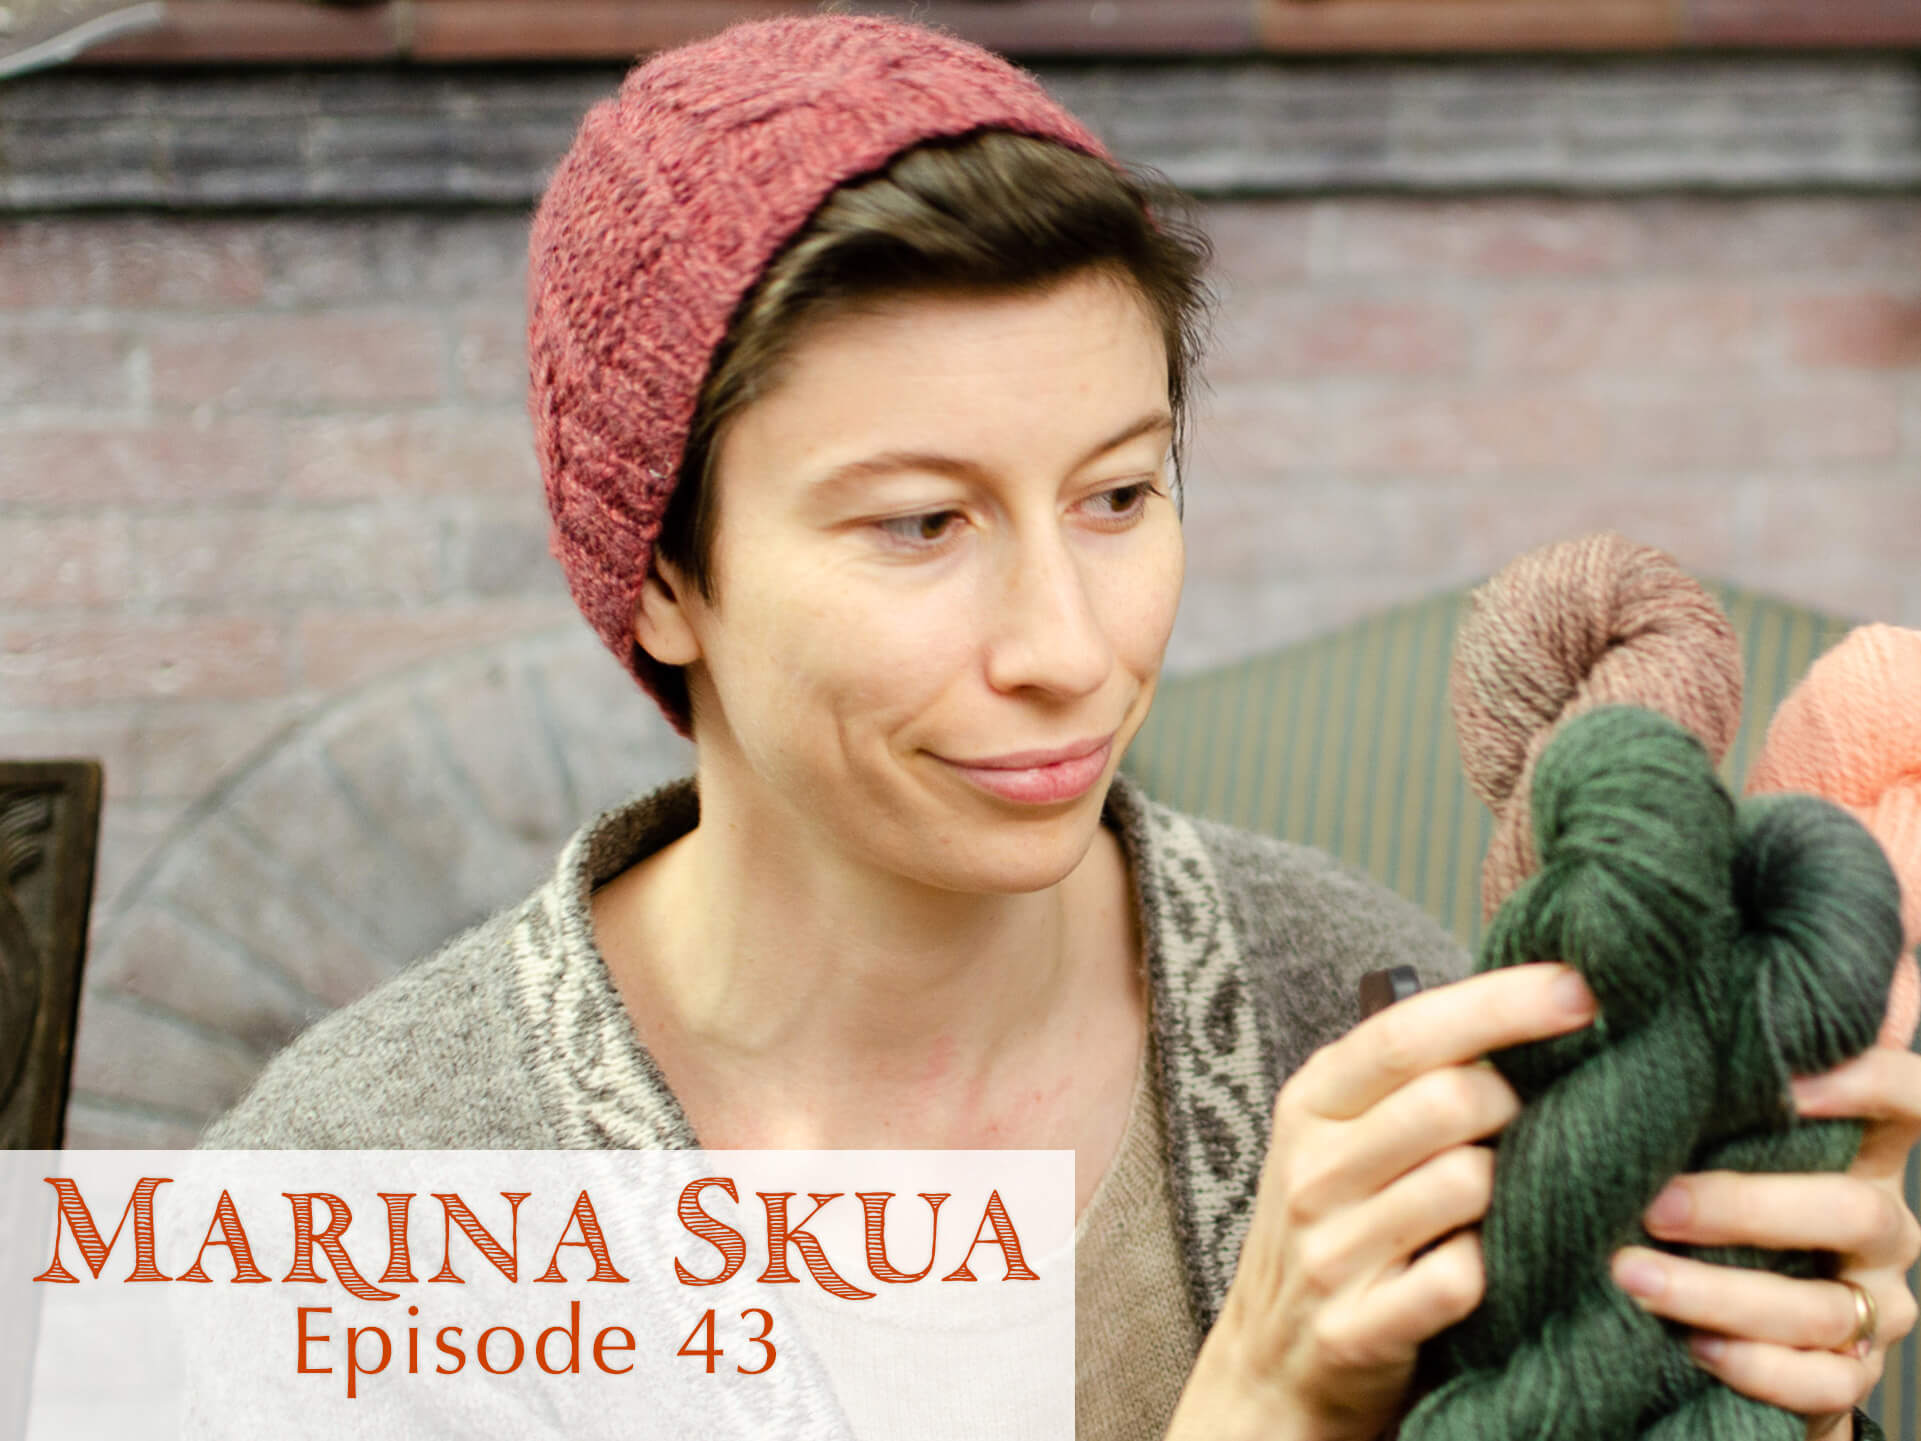 Episode 43 of the Podcast: Mendip 4-Ply – new yarn shades and knit project inspiration, and hand-spun knitting